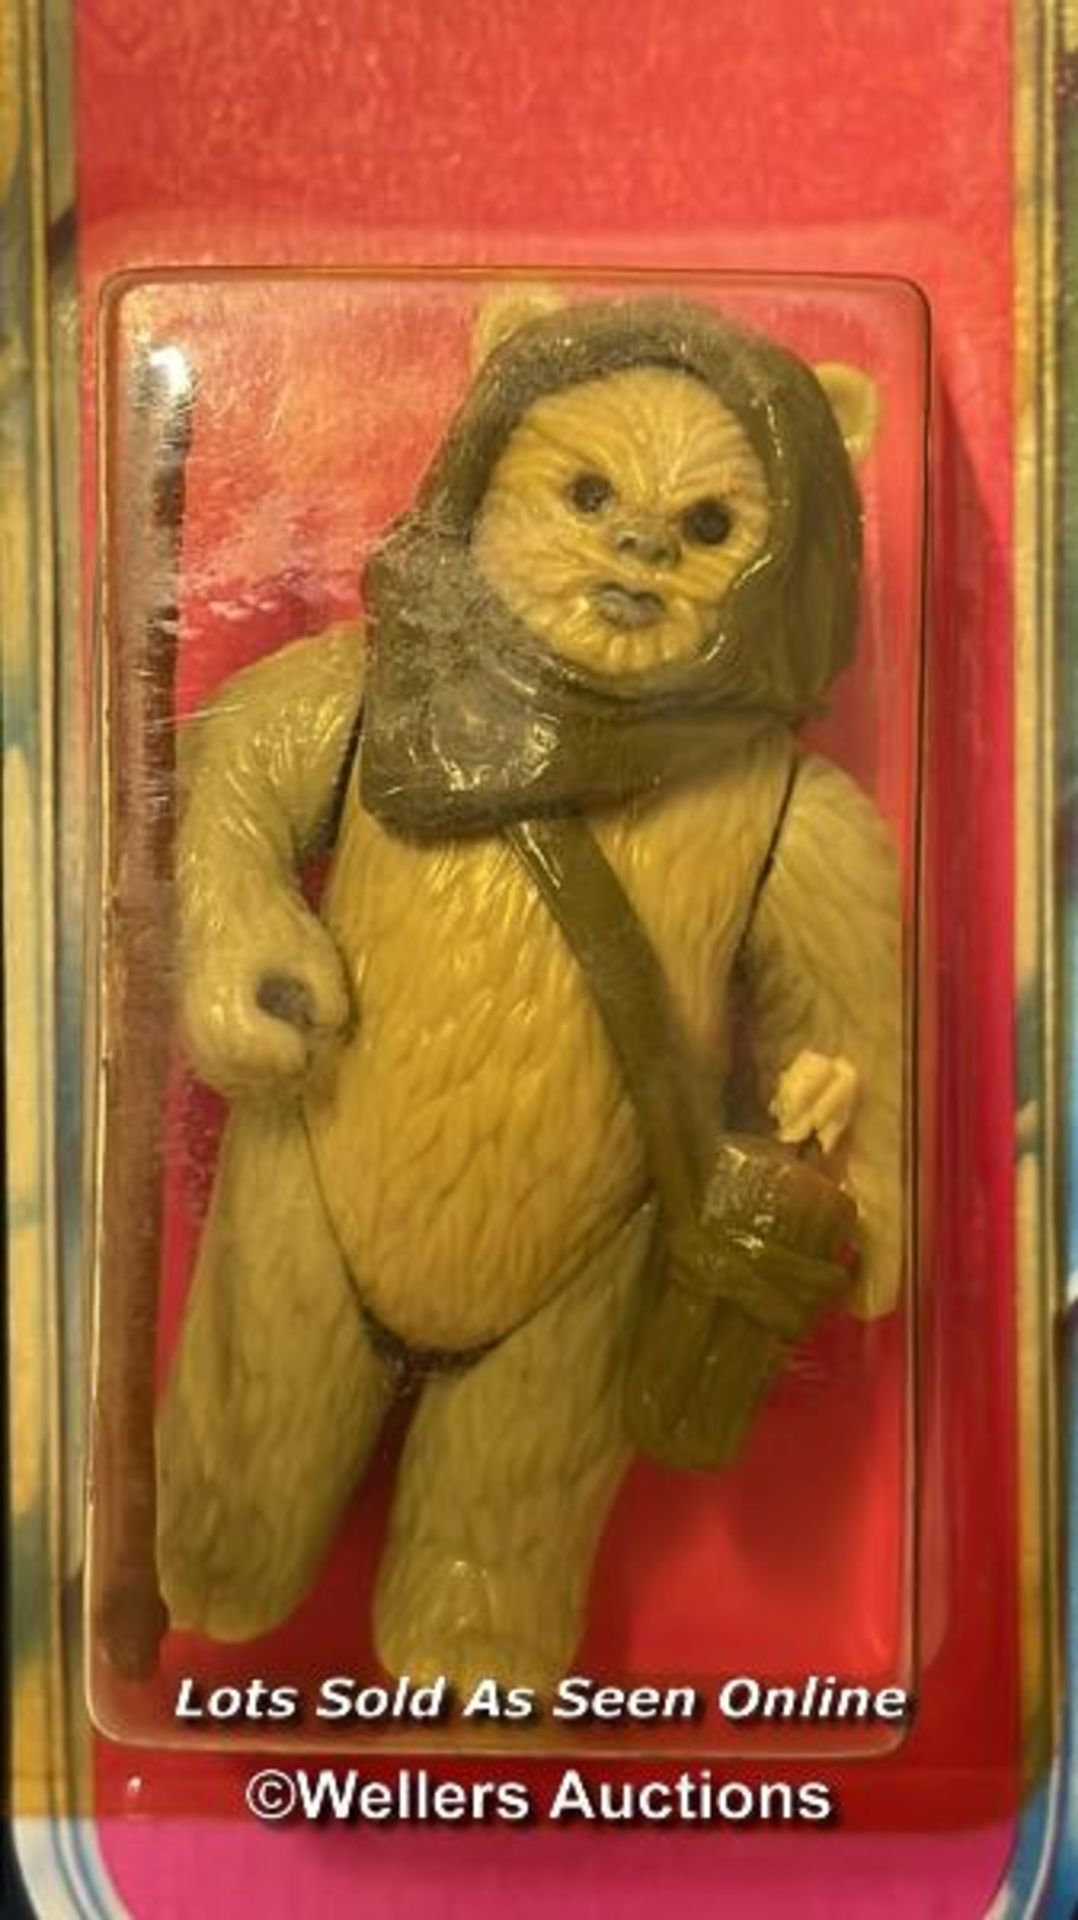 Star Wars vintage Lumat 3 3/4" figure, Power of the Force 92 back with collectors coin, Kenner 1984, - Image 2 of 11